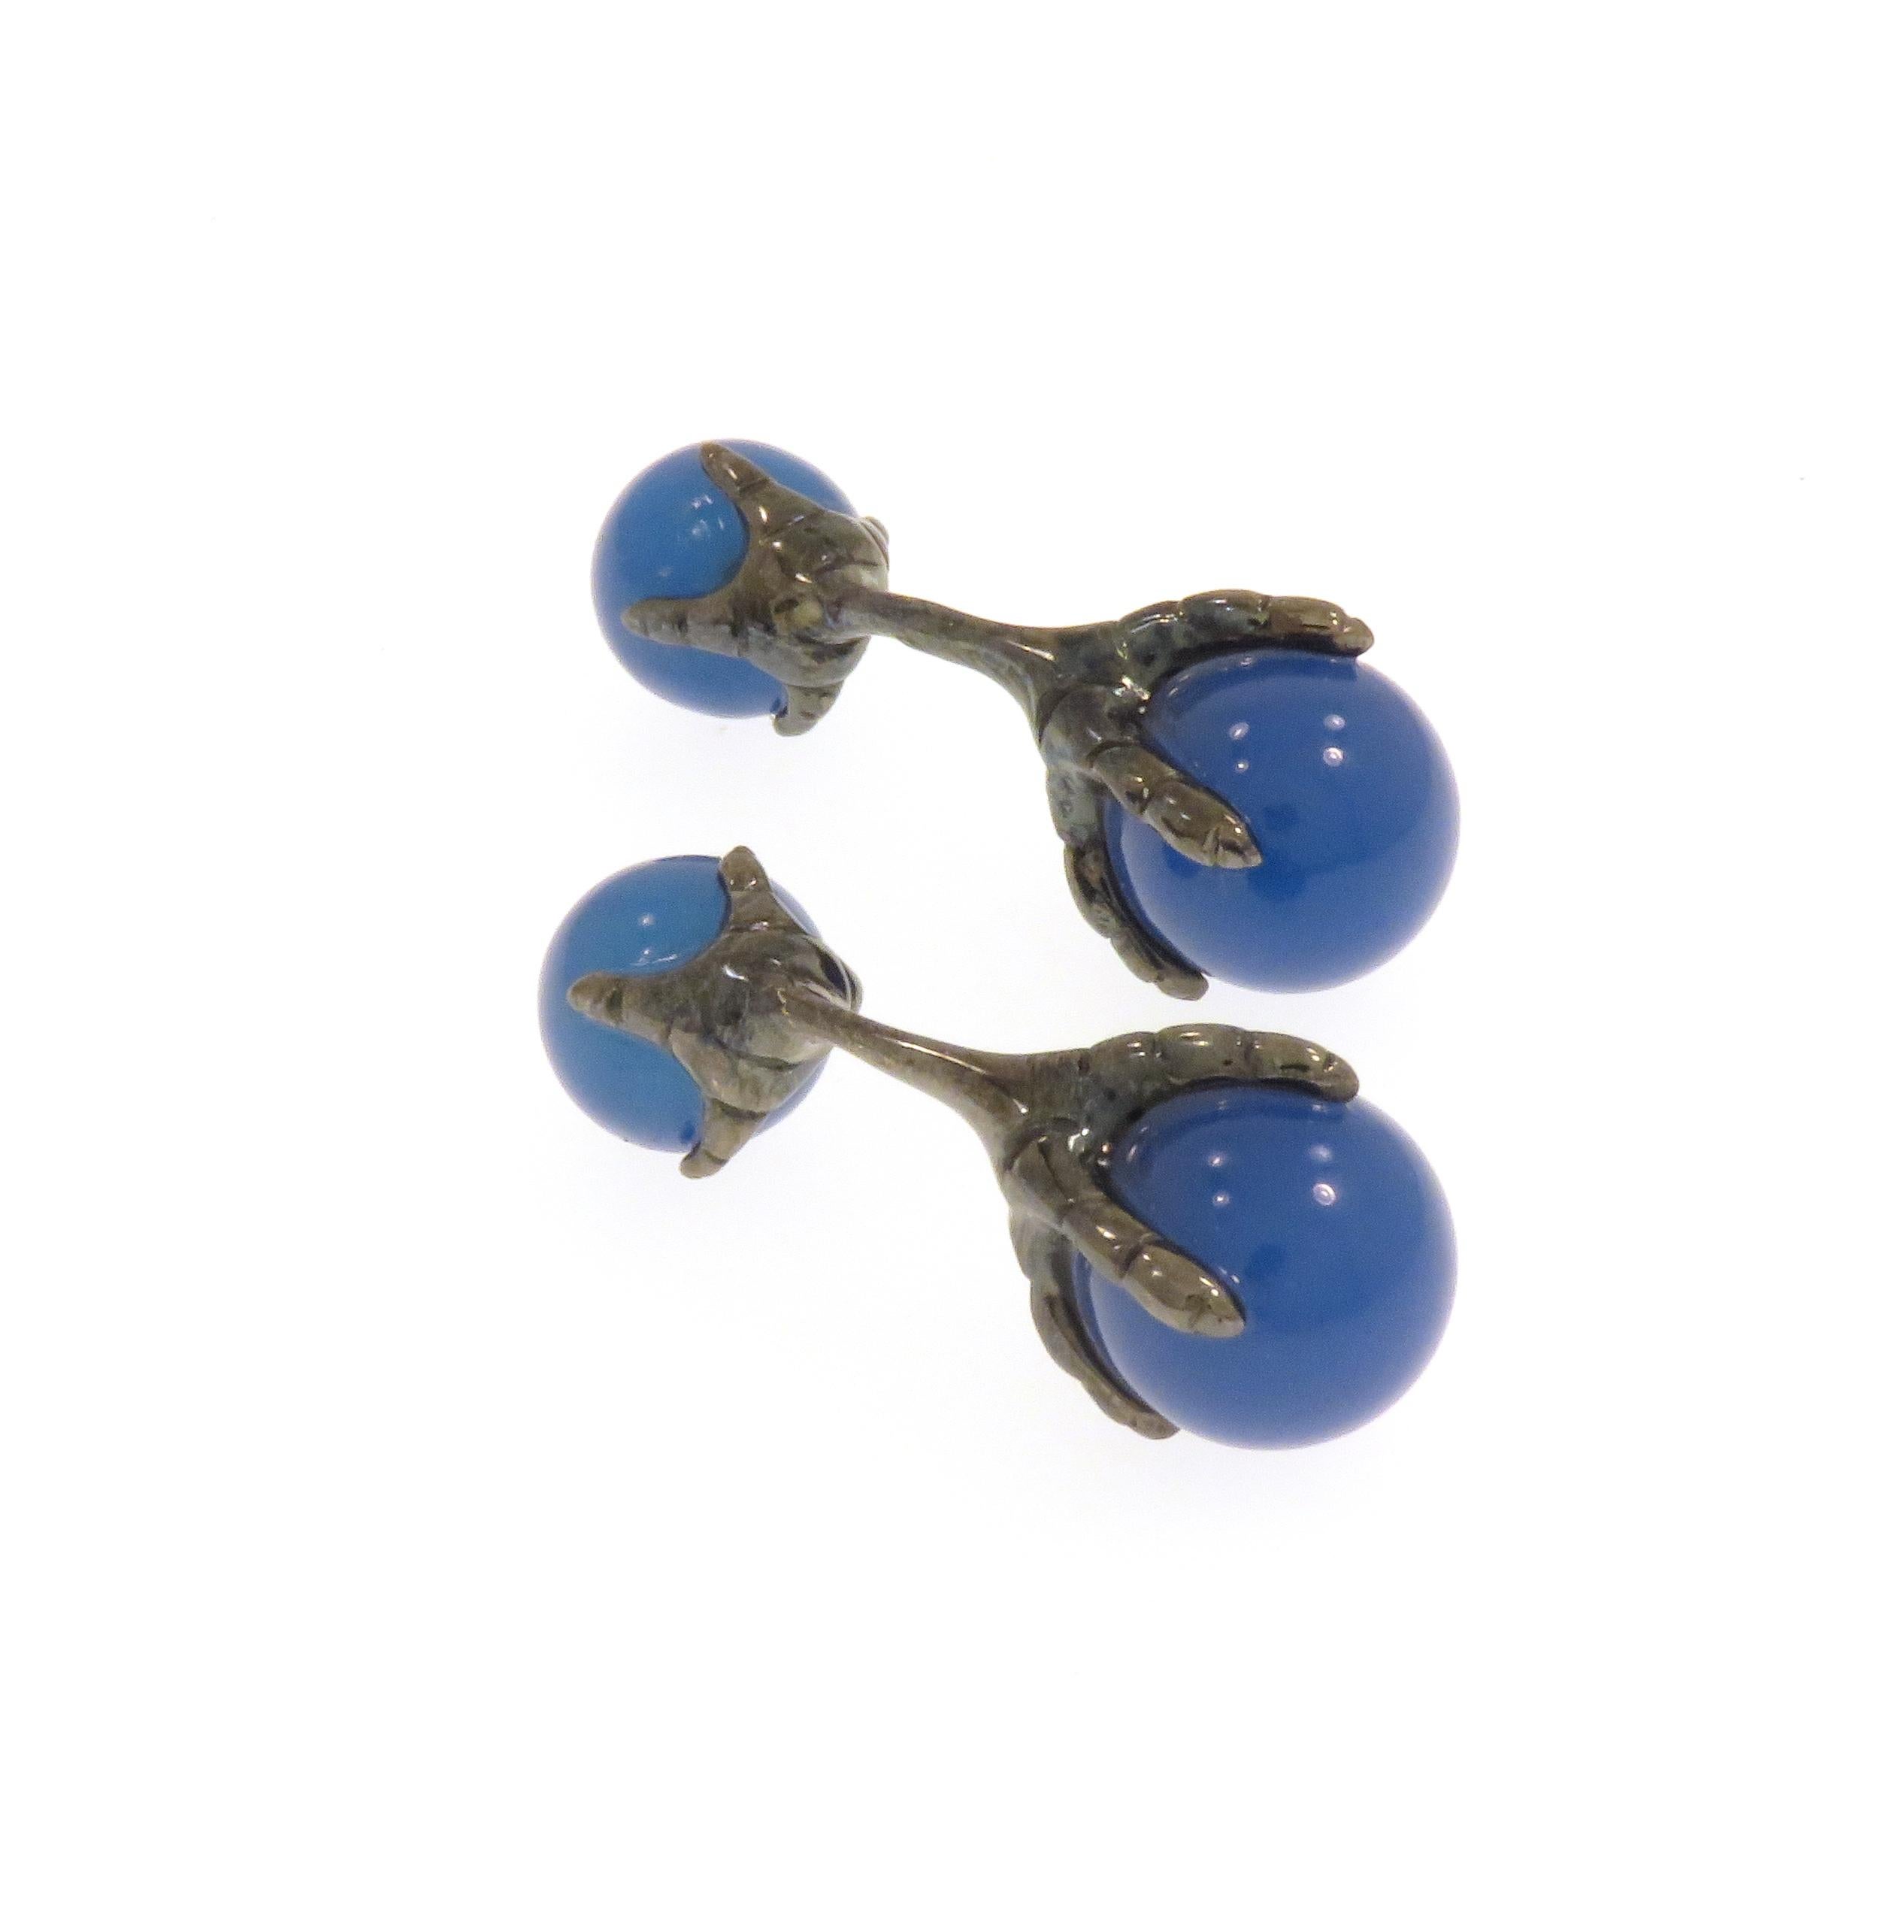 Beautiful cufflinks crafted in 9k white gold black rhodium plating featuring eagle talons grabbing blue agate beads. The size of the bigger beads is 12 millimeters / 0.472 inches and of the smaller ones is 10 millimeters / 0.393 inches.  These